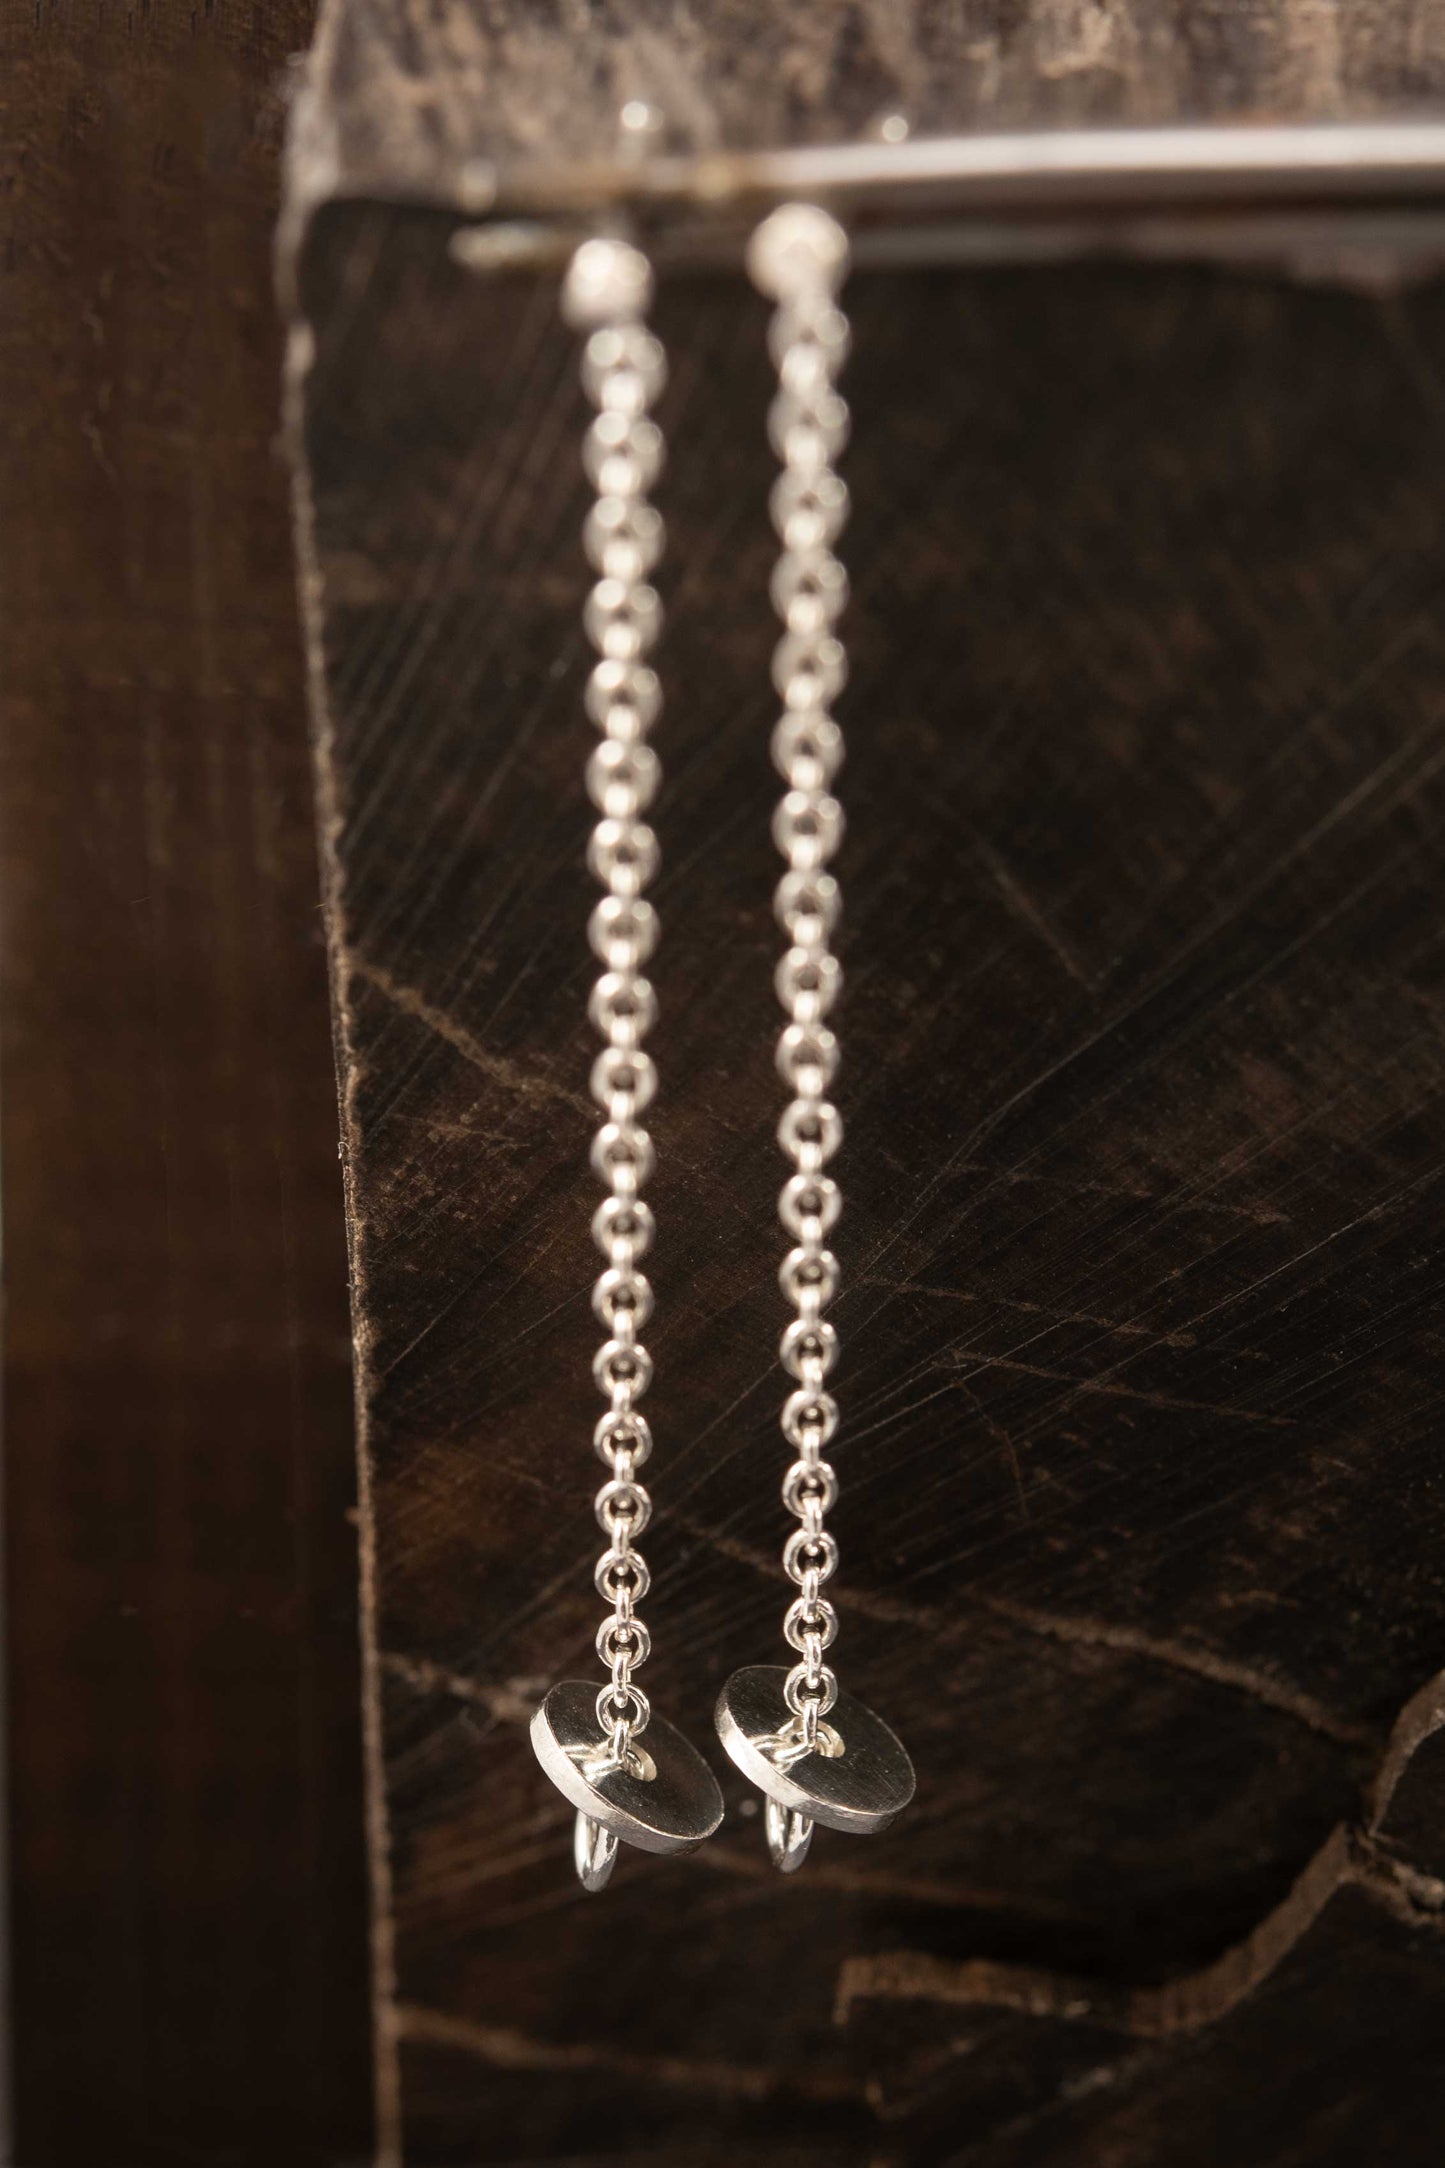 Long Silver Chain earrings with small disc pendants